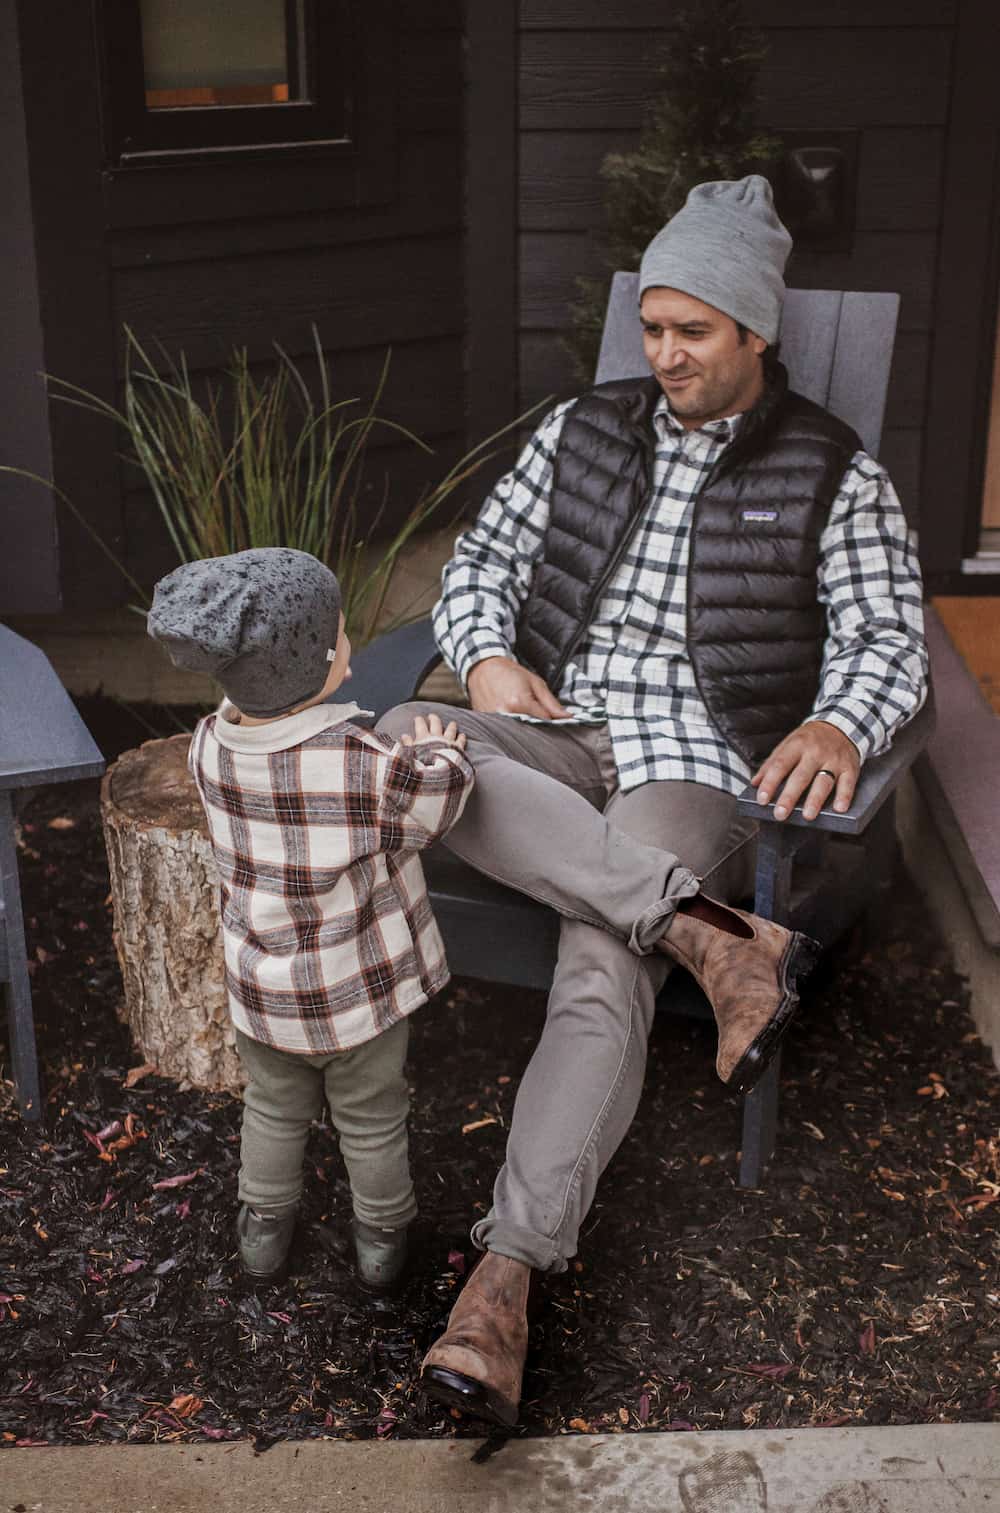 image of a man sitting in a chair wearing grey pants, brown boots, and a plaid shirt, with his son in a plaid jacket and green boots